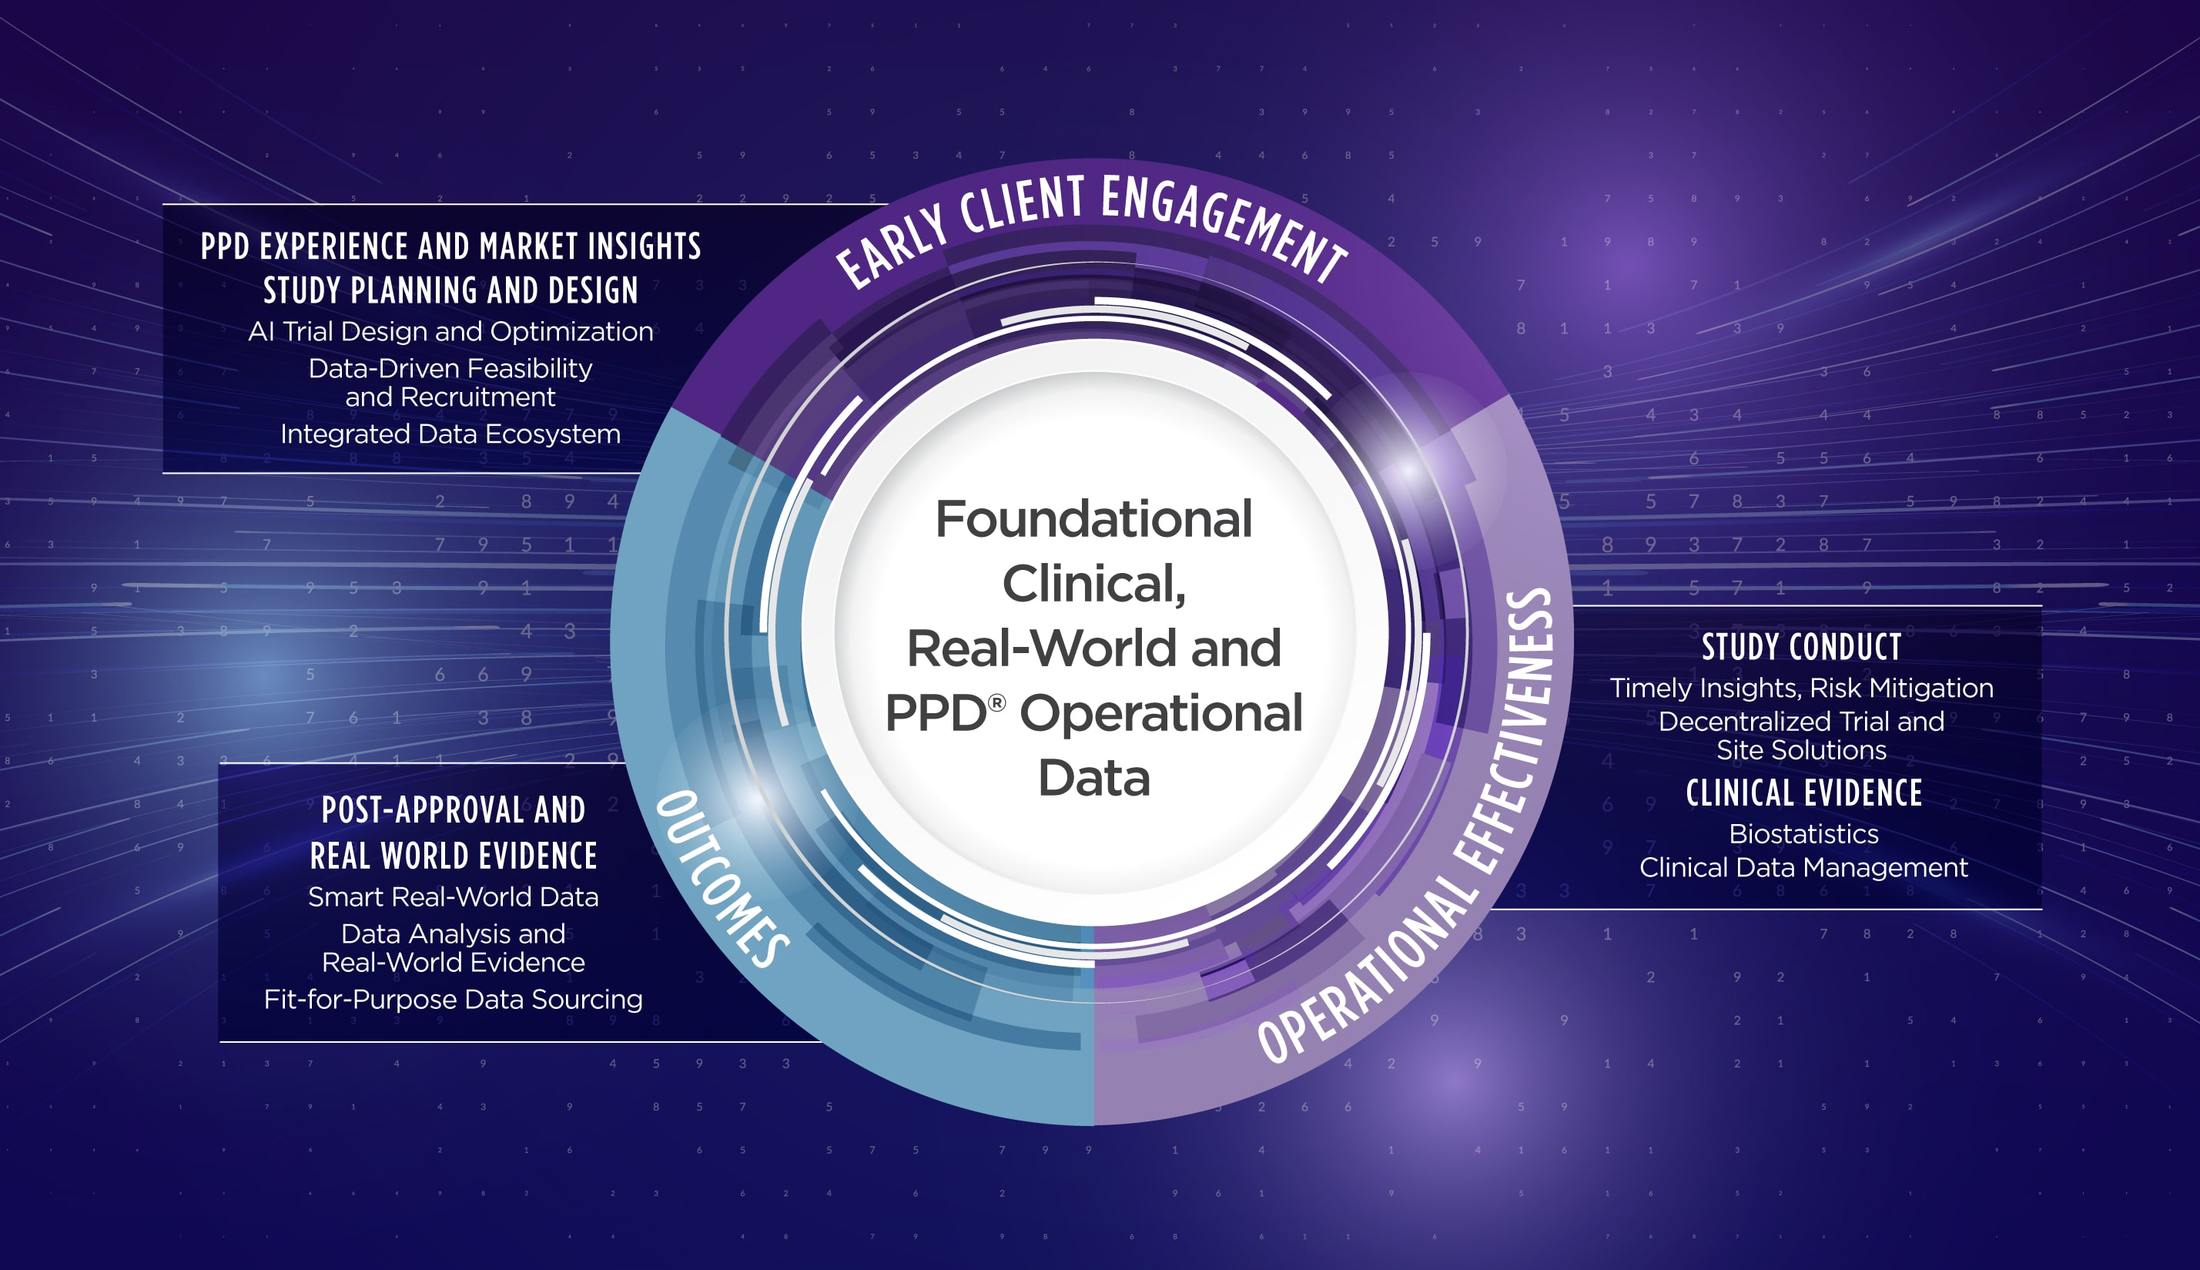 Foundational, Clinical, Real-World, and PPD Operational Data with early client engagement, operational effectiveness, and outcomes.